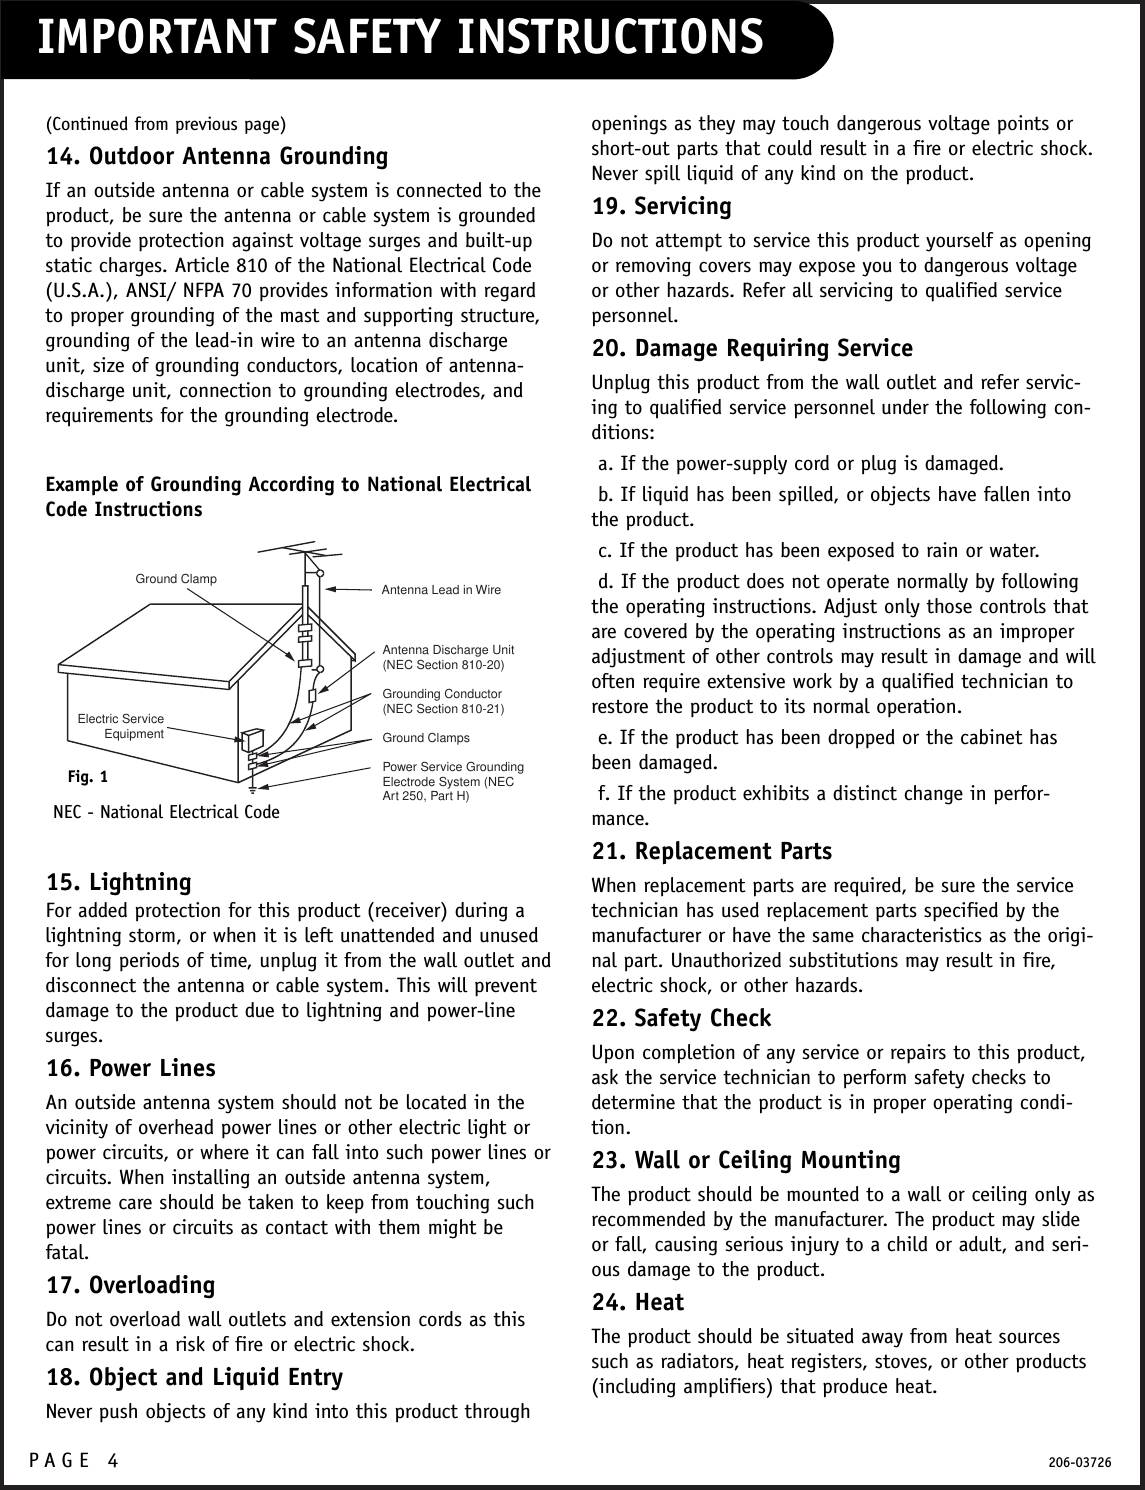 P A GE 4 206-03726(Continued from previous page)14. Outdoor Antenna GroundingIf an outside antenna or cable system is connected to theproduct, be sure the antenna or cable system is groundedto provide protection against voltage surges and built-upstatic charges. Article 810 of the National Electrical Code(U.S.A.), ANSI/ NFPA 70 provides information with regardto proper grounding of the mast and supporting structure,grounding of the lead-in wire to an antenna dischargeunit, size of grounding conductors, location of antenna-discharge unit, connection to grounding electrodes, andrequirements for the grounding electrode.15. LightningFor added protection for this product (receiver) during alightning storm, or when it is left unattended and unusedfor long periods of time, unplug it from the wall outlet anddisconnect the antenna or cable system. This will preventdamage to the product due to lightning and power-linesurges.16. Power LinesAn outside antenna system should not be located in thevicinity of overhead power lines or other electric light orpower circuits, or where it can fall into such power lines orcircuits. When installing an outside antenna system,extreme care should be taken to keep from touching suchpower lines or circuits as contact with them might befatal.17. OverloadingDo not overload wall outlets and extension cords as thiscan result in a risk of fire or electric shock.18. Object and Liquid EntryNever push objects of any kind into this product throughopenings as they may touch dangerous voltage points orshort-out parts that could result in a fire or electric shock.Never spill liquid of any kind on the product.19. ServicingDo not attempt to service this product yourself as openingor removing covers may expose you to dangerous voltageor other hazards. Refer all servicing to qualified servicepersonnel.20. Damage Requiring ServiceUnplug this product from the wall outlet and refer servic-ing to qualified service personnel under the following con-ditions:a. If the power-supply cord or plug is damaged.b. If liquid has been spilled, or objects have fallen intothe product.c. If the product has been exposed to rain or water.d. If the product does not operate normally by followingthe operating instructions. Adjust only those controls thatare covered by the operating instructions as an improperadjustment of other controls may result in damage and willoften require extensive work by a qualified technician torestore the product to its normal operation.e. If the product has been dropped or the cabinet hasbeen damaged.f. If the product exhibits a distinct change in perfor-mance.21. Replacement PartsWhen replacement parts are required, be sure the servicetechnician has used replacement parts specified by themanufacturer or have the same characteristics as the origi-nal part. Unauthorized substitutions may result in fire,electric shock, or other hazards.22. Safety CheckUpon completion of any service or repairs to this product,ask the service technician to perform safety checks todetermine that the product is in proper operating condi-tion.23. Wall or Ceiling MountingThe product should be mounted to a wall or ceiling only asrecommended by the manufacturer. The product may slideor fall, causing serious injury to a child or adult, and seri-ous damage to the product.24. HeatThe product should be situated away from heat sourcessuch as radiators, heat registers, stoves, or other products(including amplifiers) that produce heat.Antenna Lead in WireAntenna Discharge Unit(NEC Section 810-20)Grounding Conductor(NEC Section 810-21)Ground ClampsPower Service GroundingElectrode System (NECArt 250, Part H)Ground ClampElectric ServiceEquipmentExample of Grounding According to National ElectricalCode InstructionsFig. 1NEC - National Electrical CodeIMPORTANT SAFETY INSTRUCTIONS